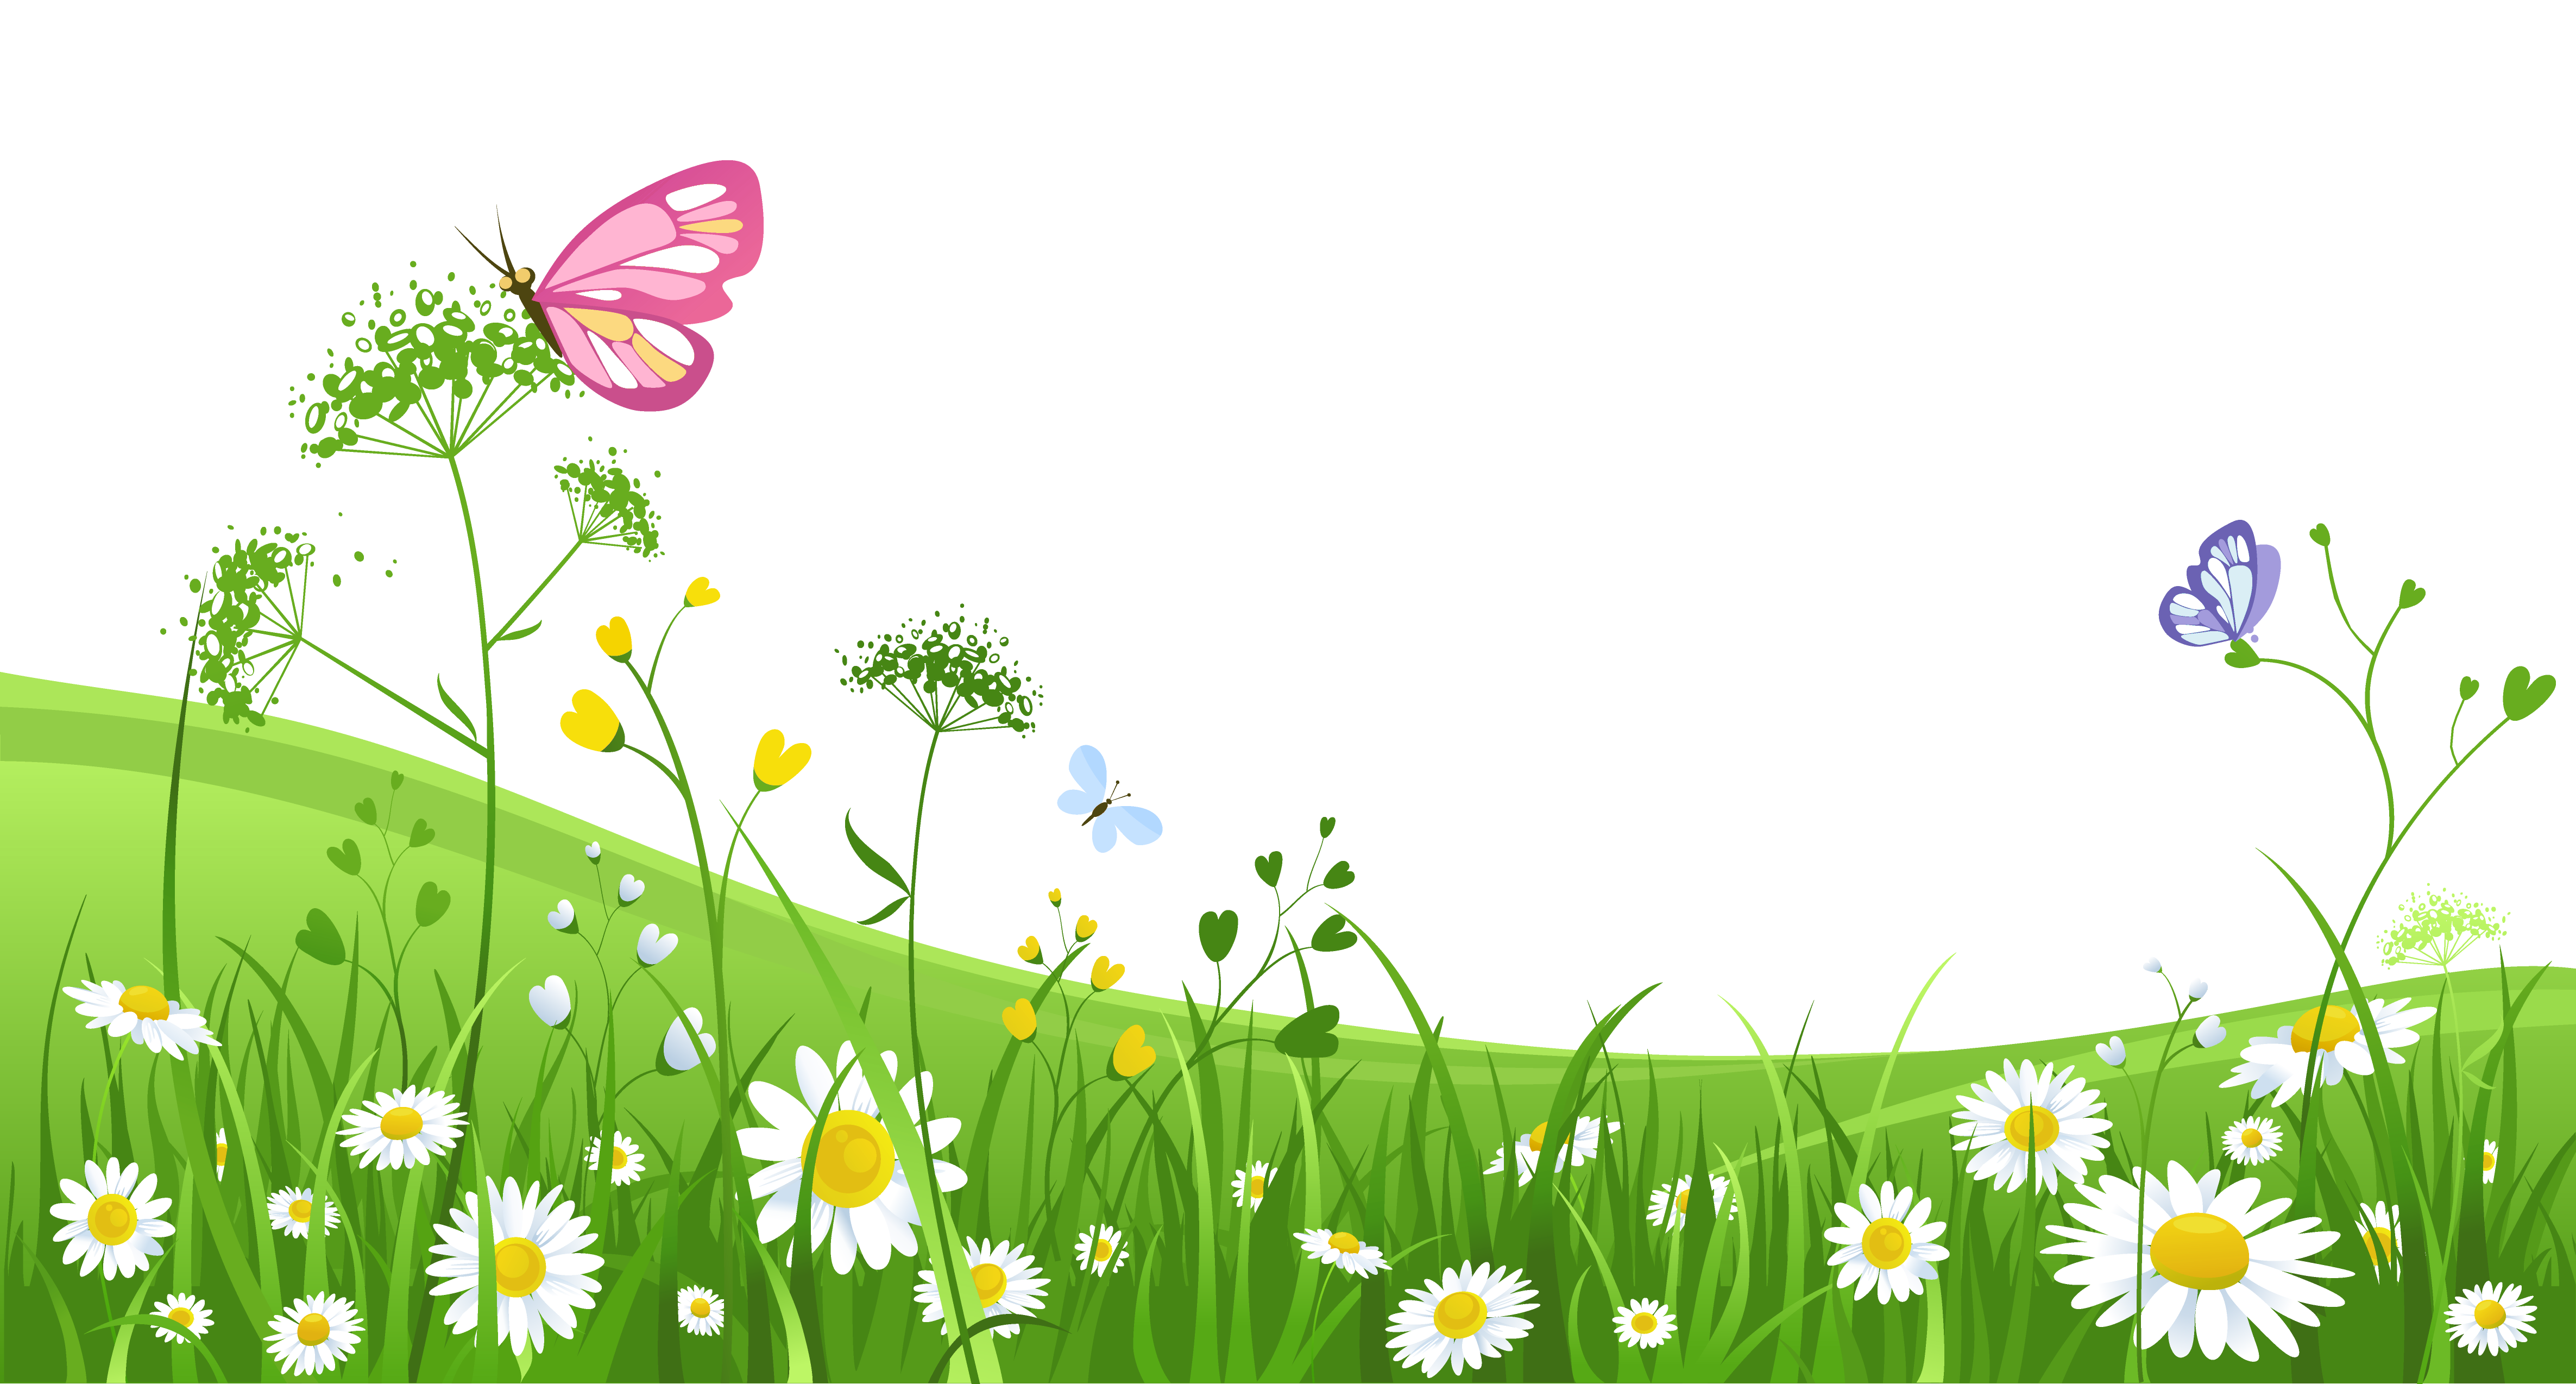 Daisy clipart nature transparent. Grass with butterflies picture